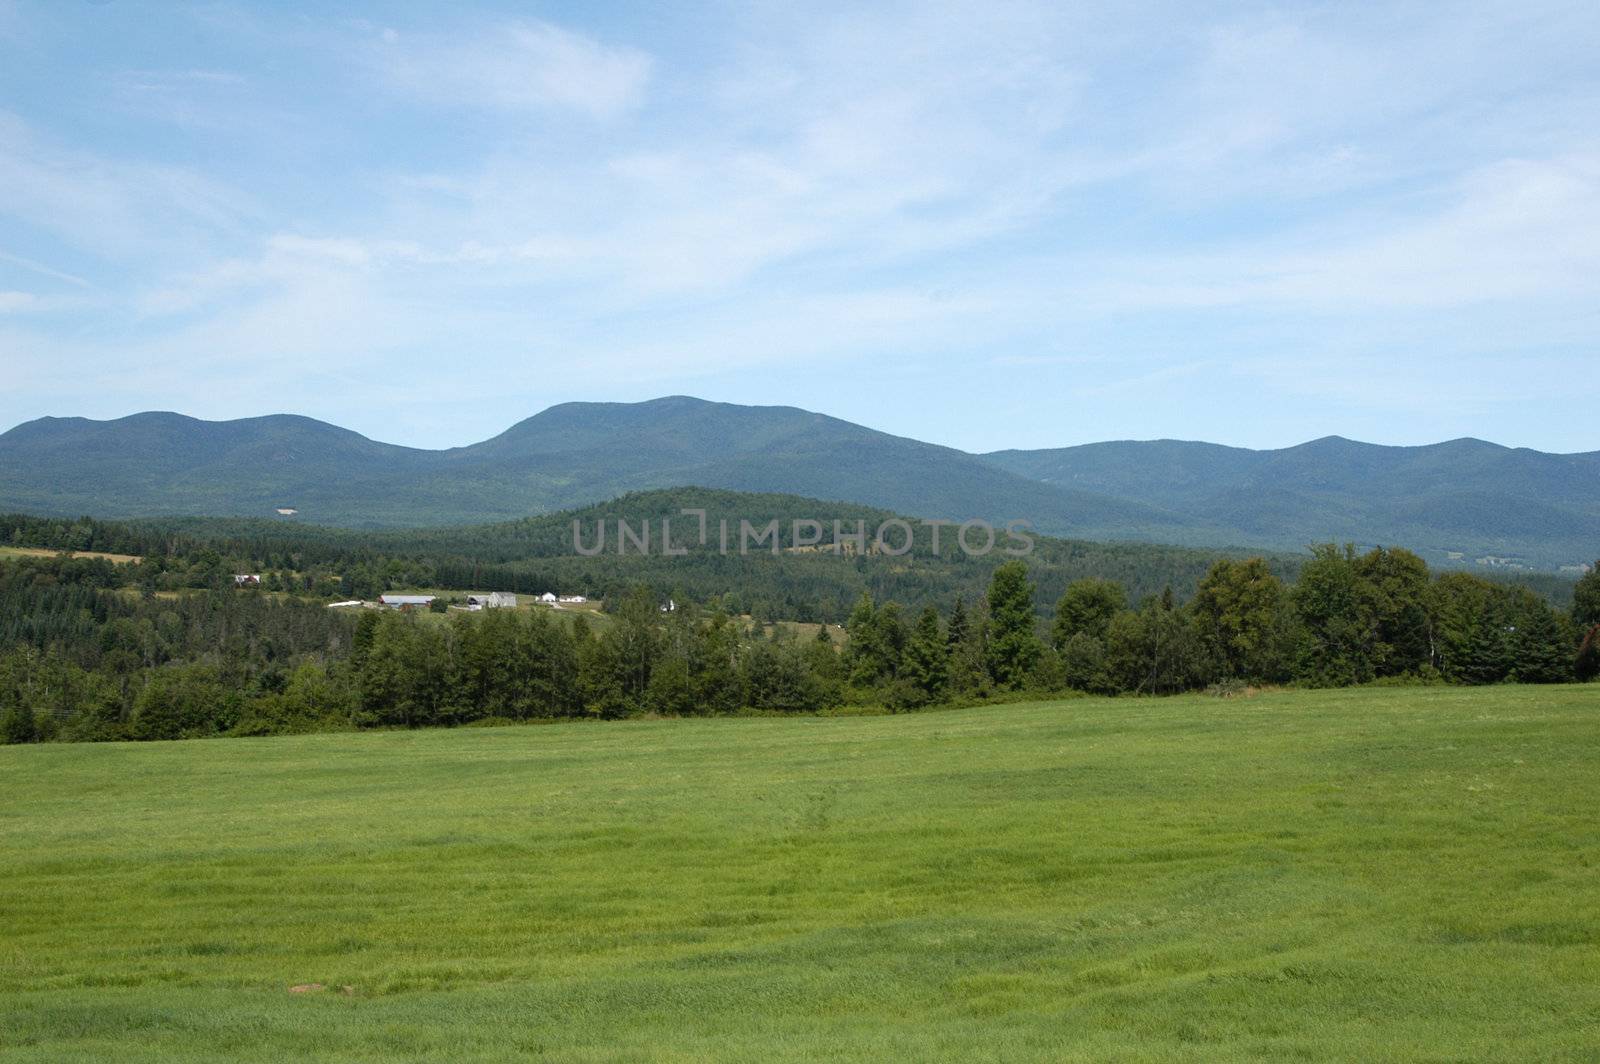 The mountains of New Hampshire in the summer time